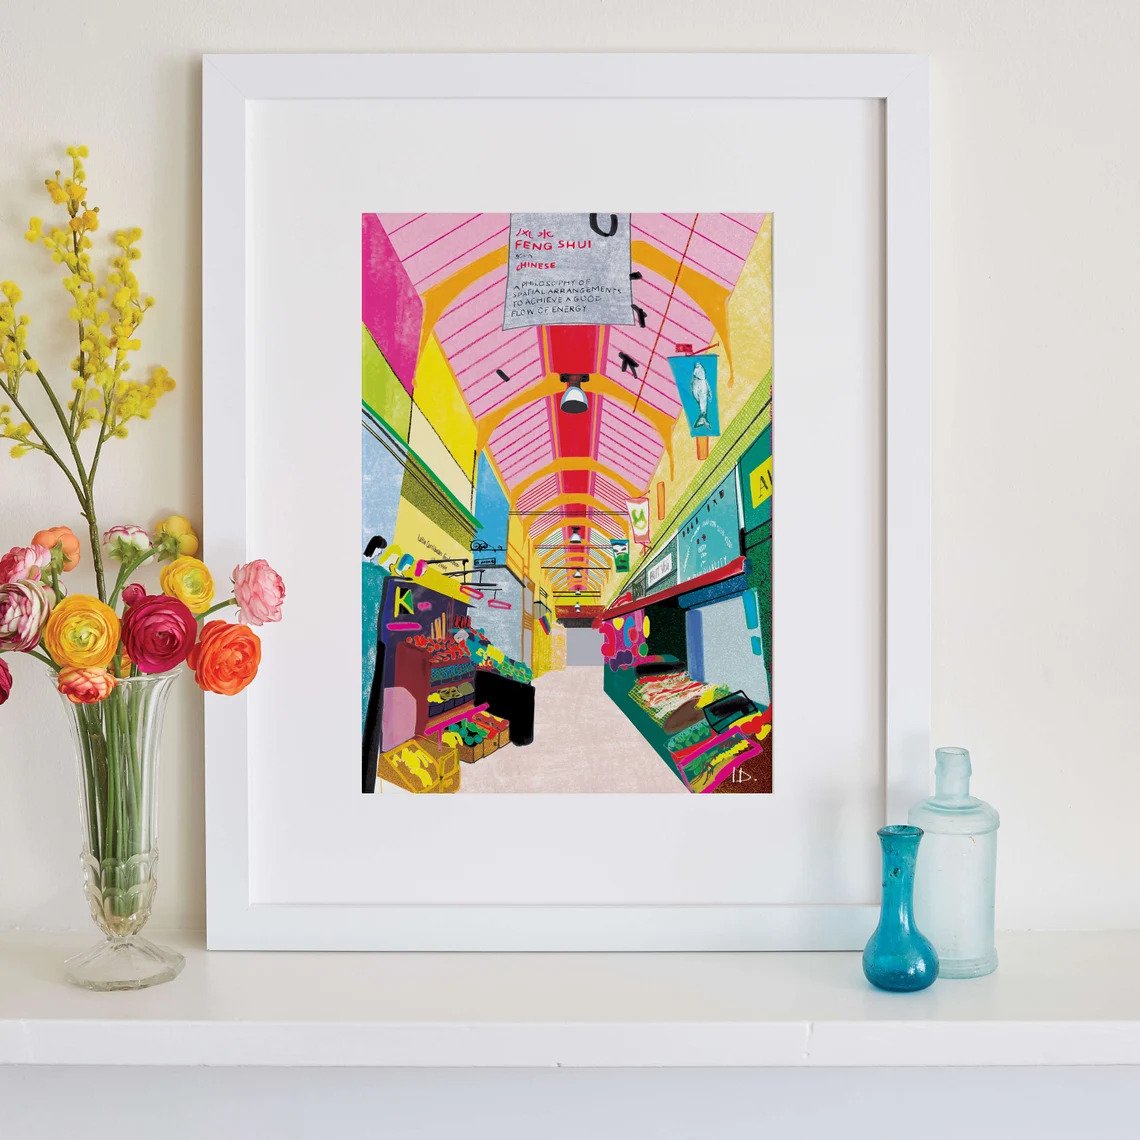 Print of the Brixton Market, which is a beloved local shopping and food spot. 